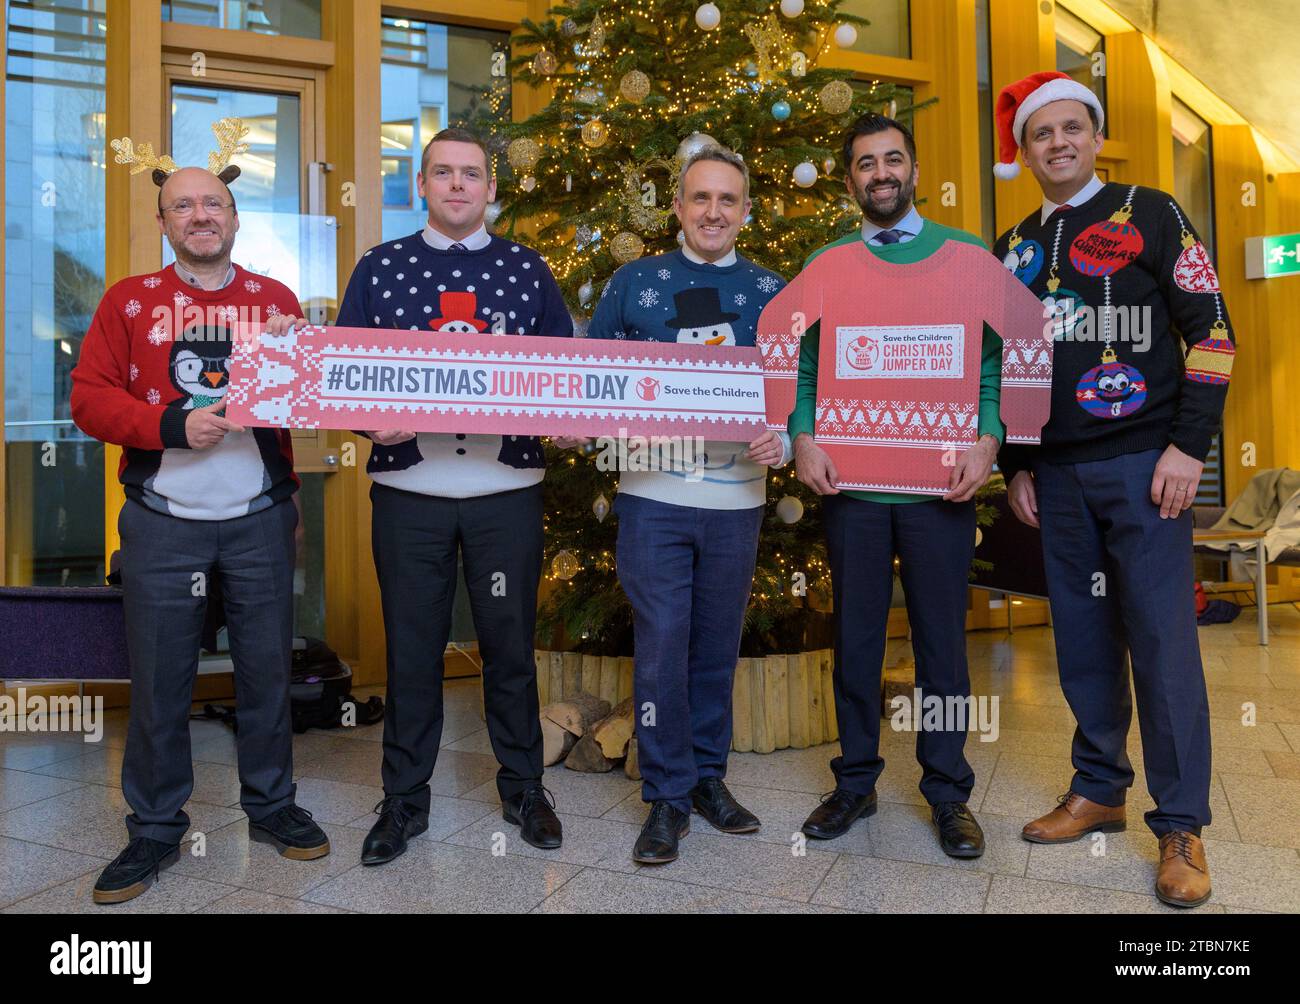 All images © Sandy Young Photography  Save the Children Christmas Jumper Day. PICTURED Party leaders at The Scottish Parliament wearing Christmas jumpers in support of Save the Children.  L-R Patrick Harvie Scottish Greens, Douglas Ross Scottish Conservatives, Alex Cole-Hamilton Lib Dems, Frist Minister Humza Yousaf SNP and Anas Sarwar Scottish Labour. Stock Photo